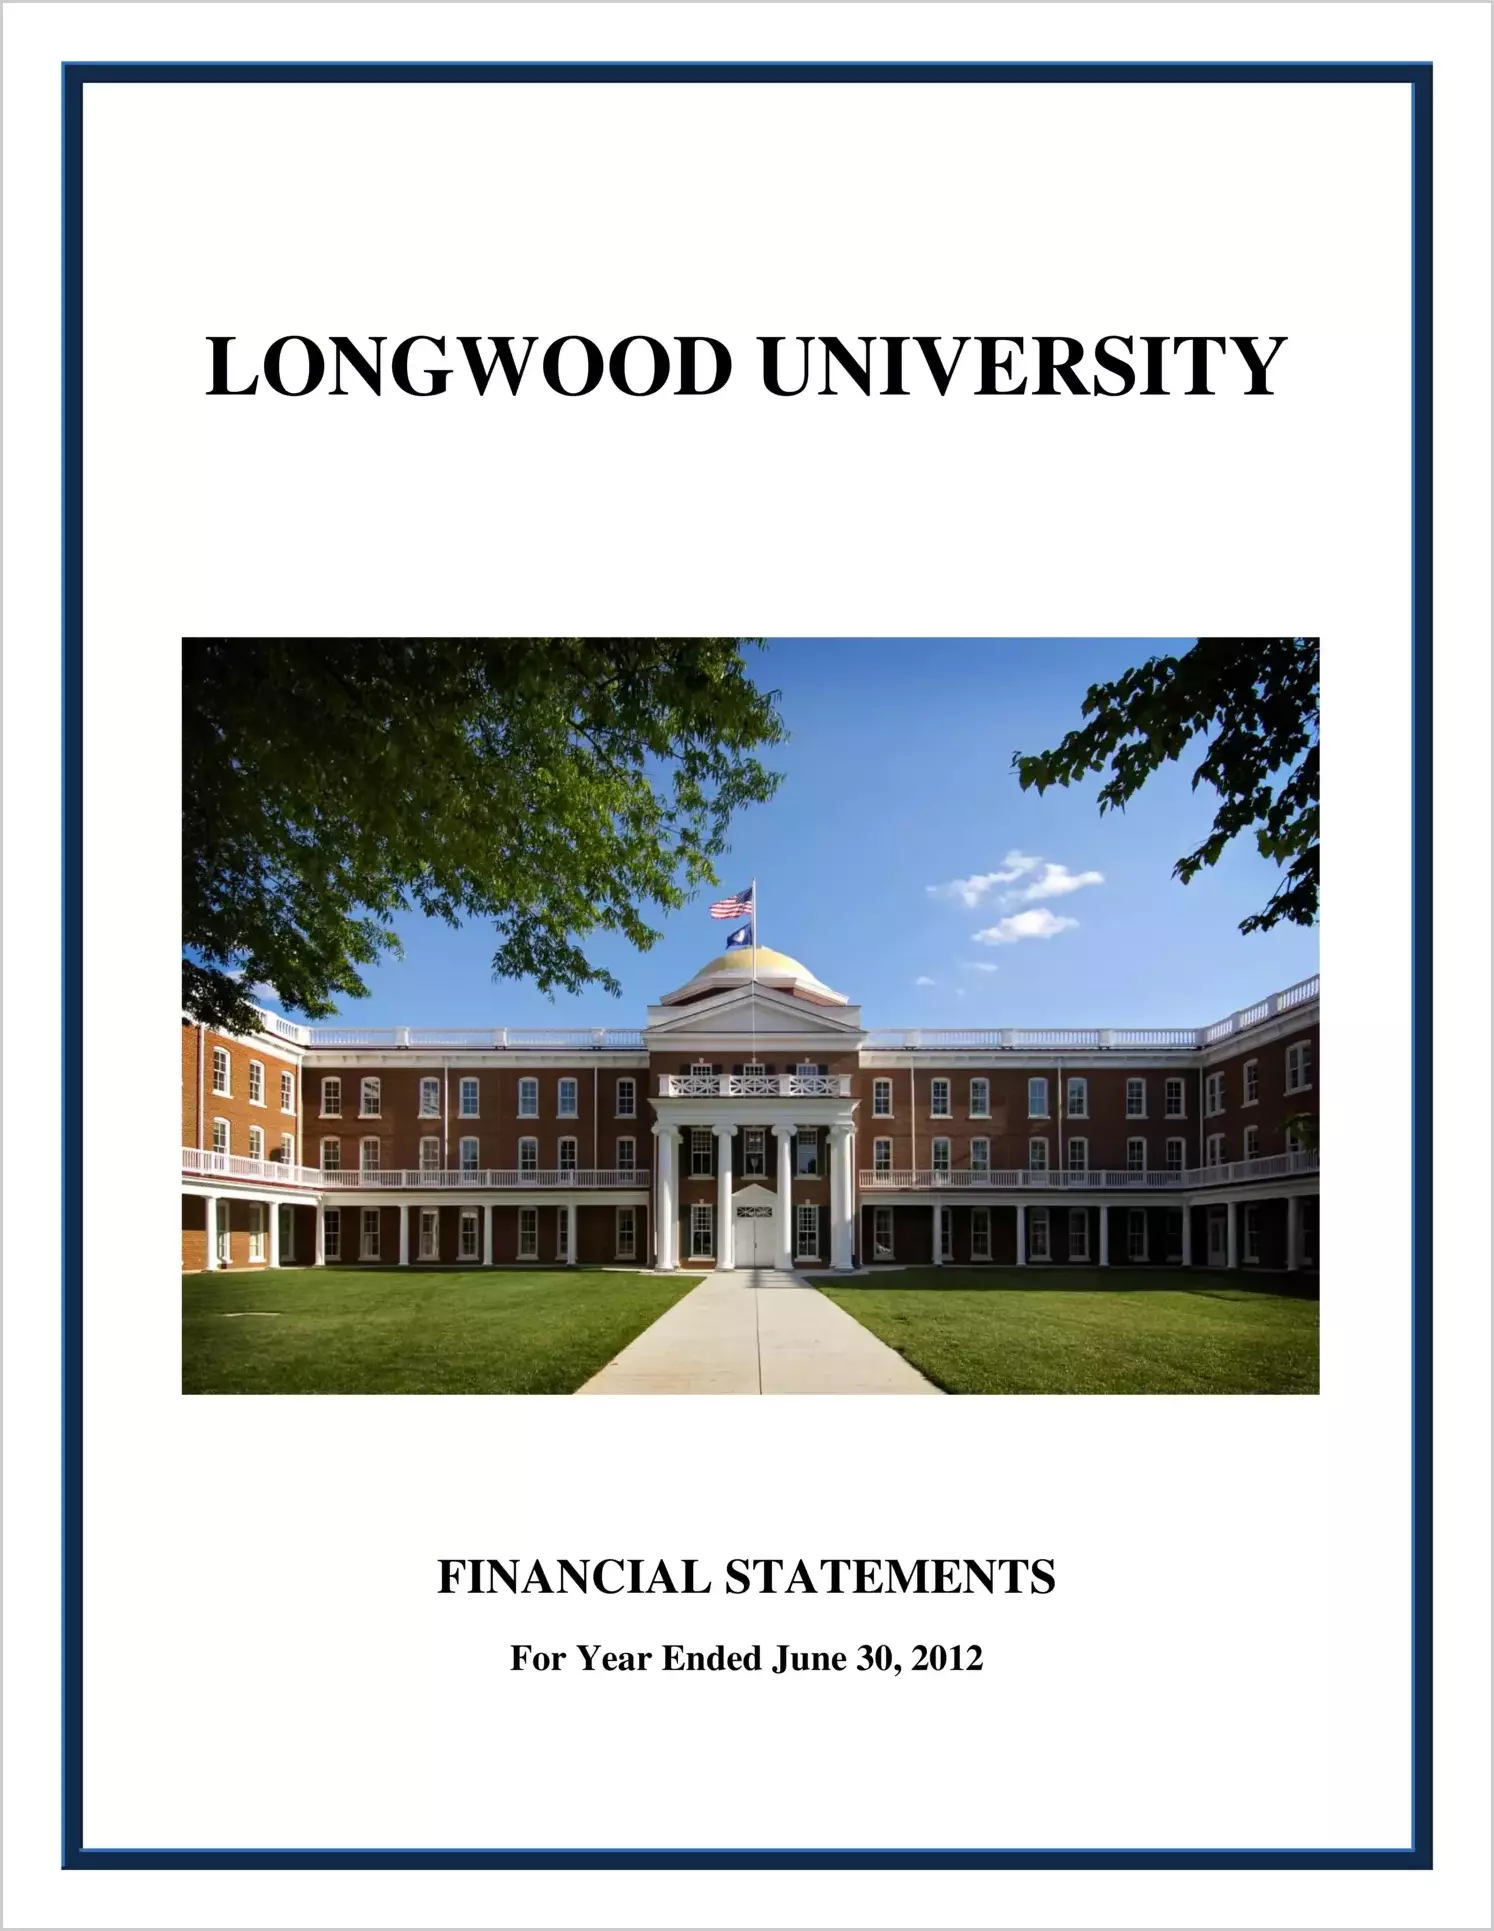 Longwood University Financial Statement for the year ended June 30, 2012